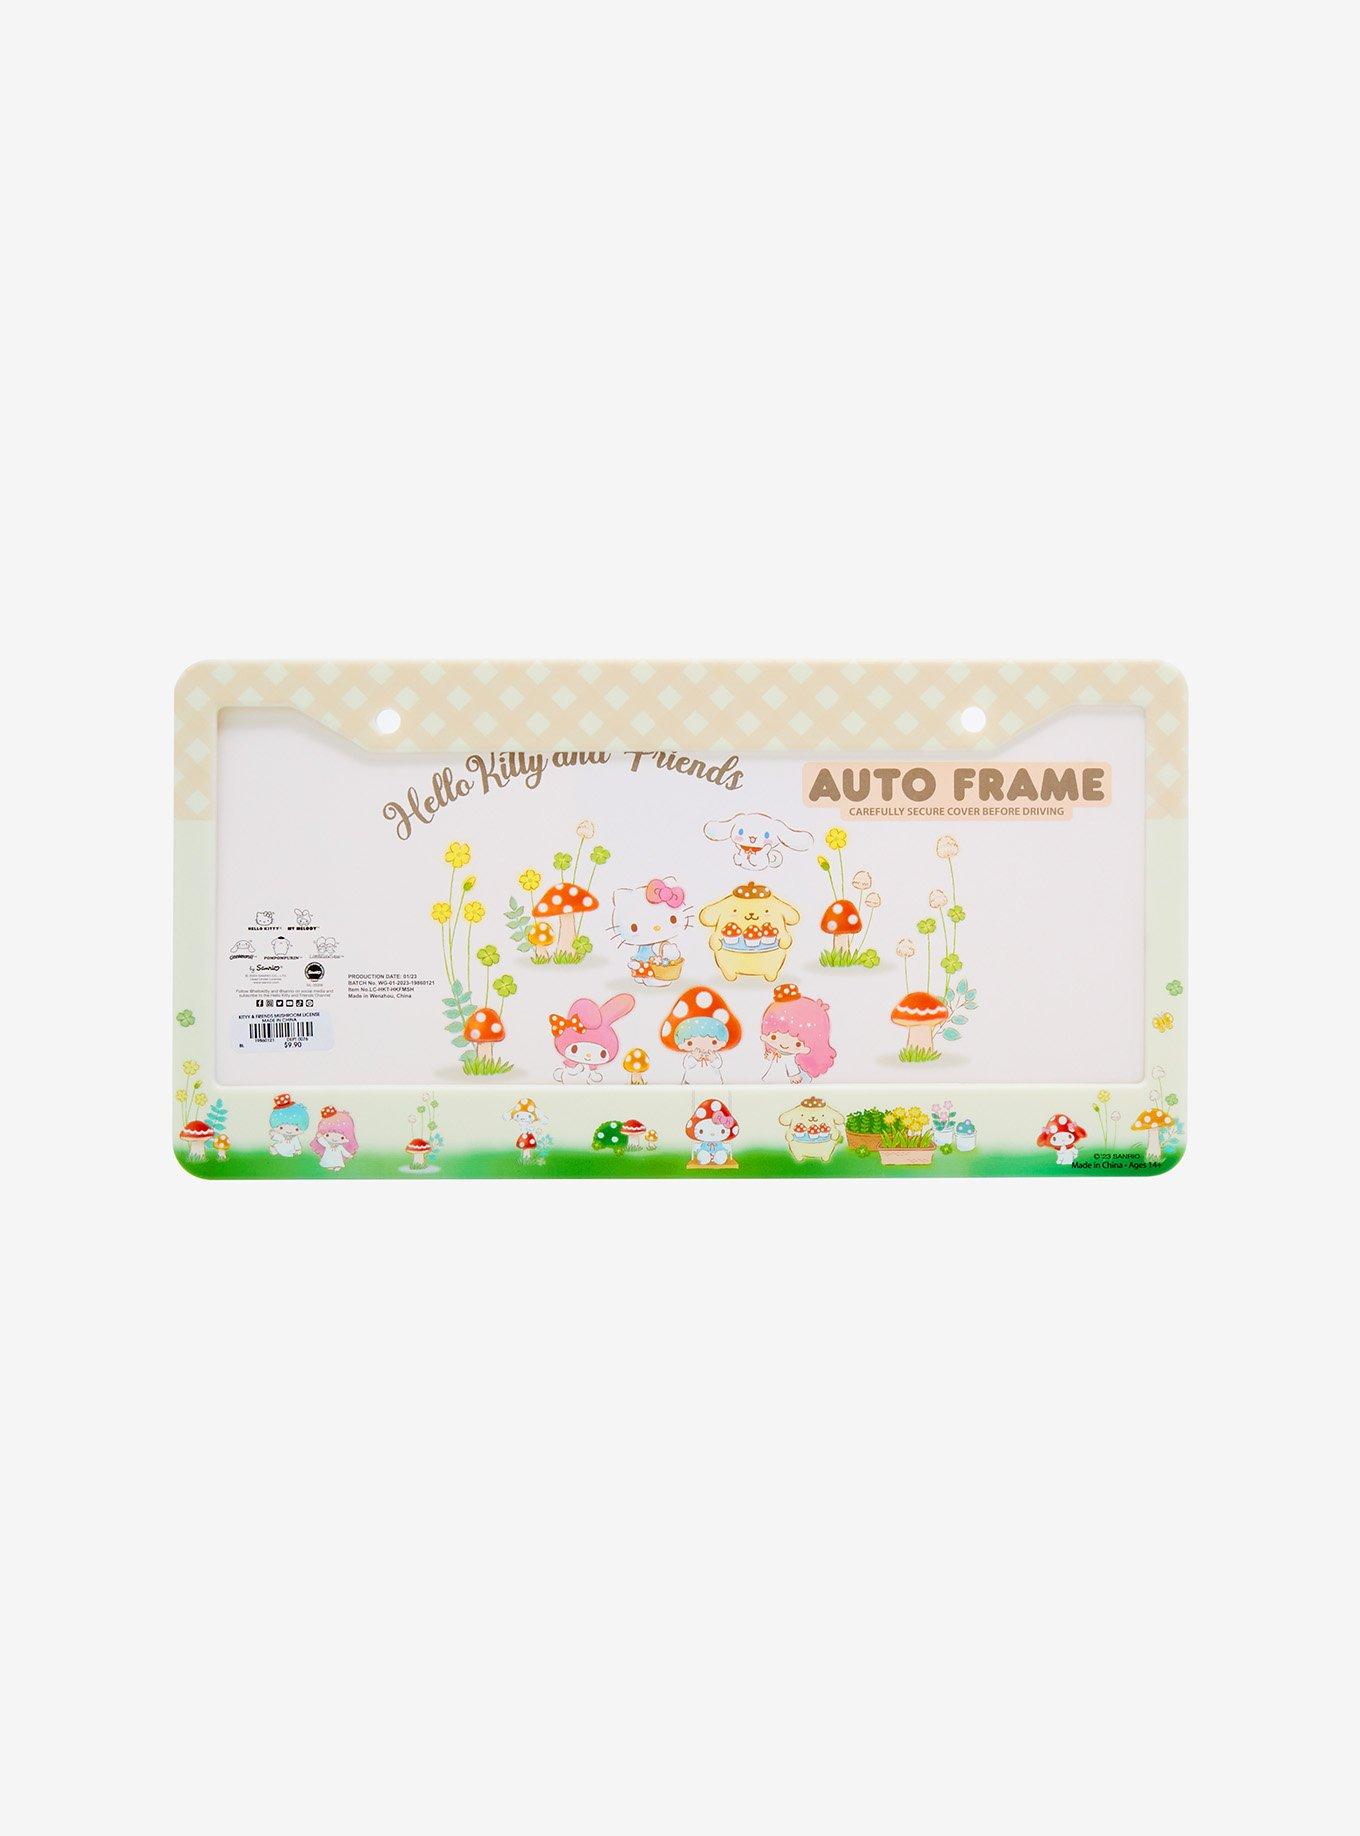 Sanrio Hello Kitty and Friends Mushroom License Plate Frame - BoxLunch Exclusive, , hi-res